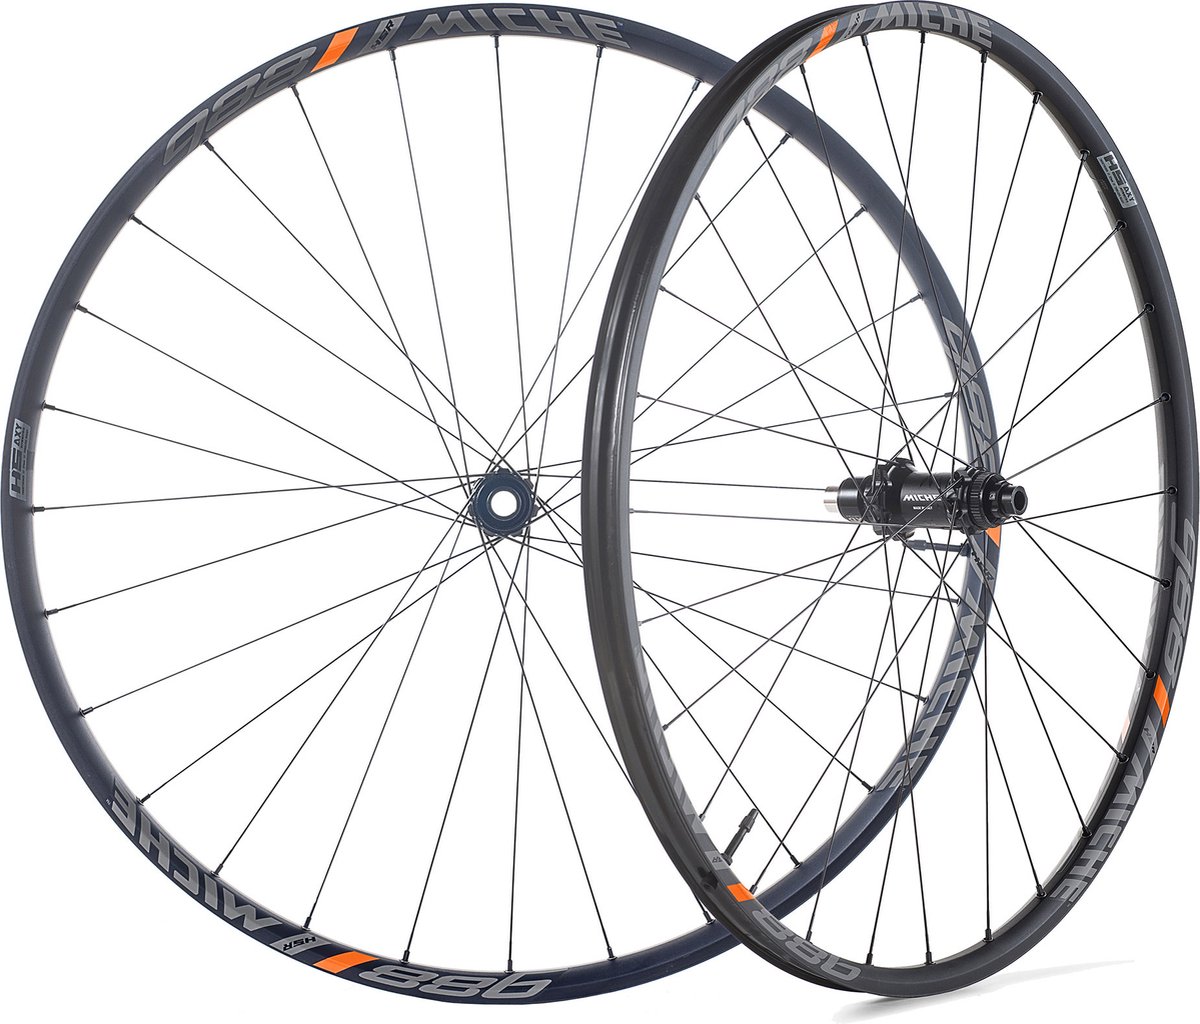 Miche wielset 988 HSR Shimano boost 110/148 mm tubeless